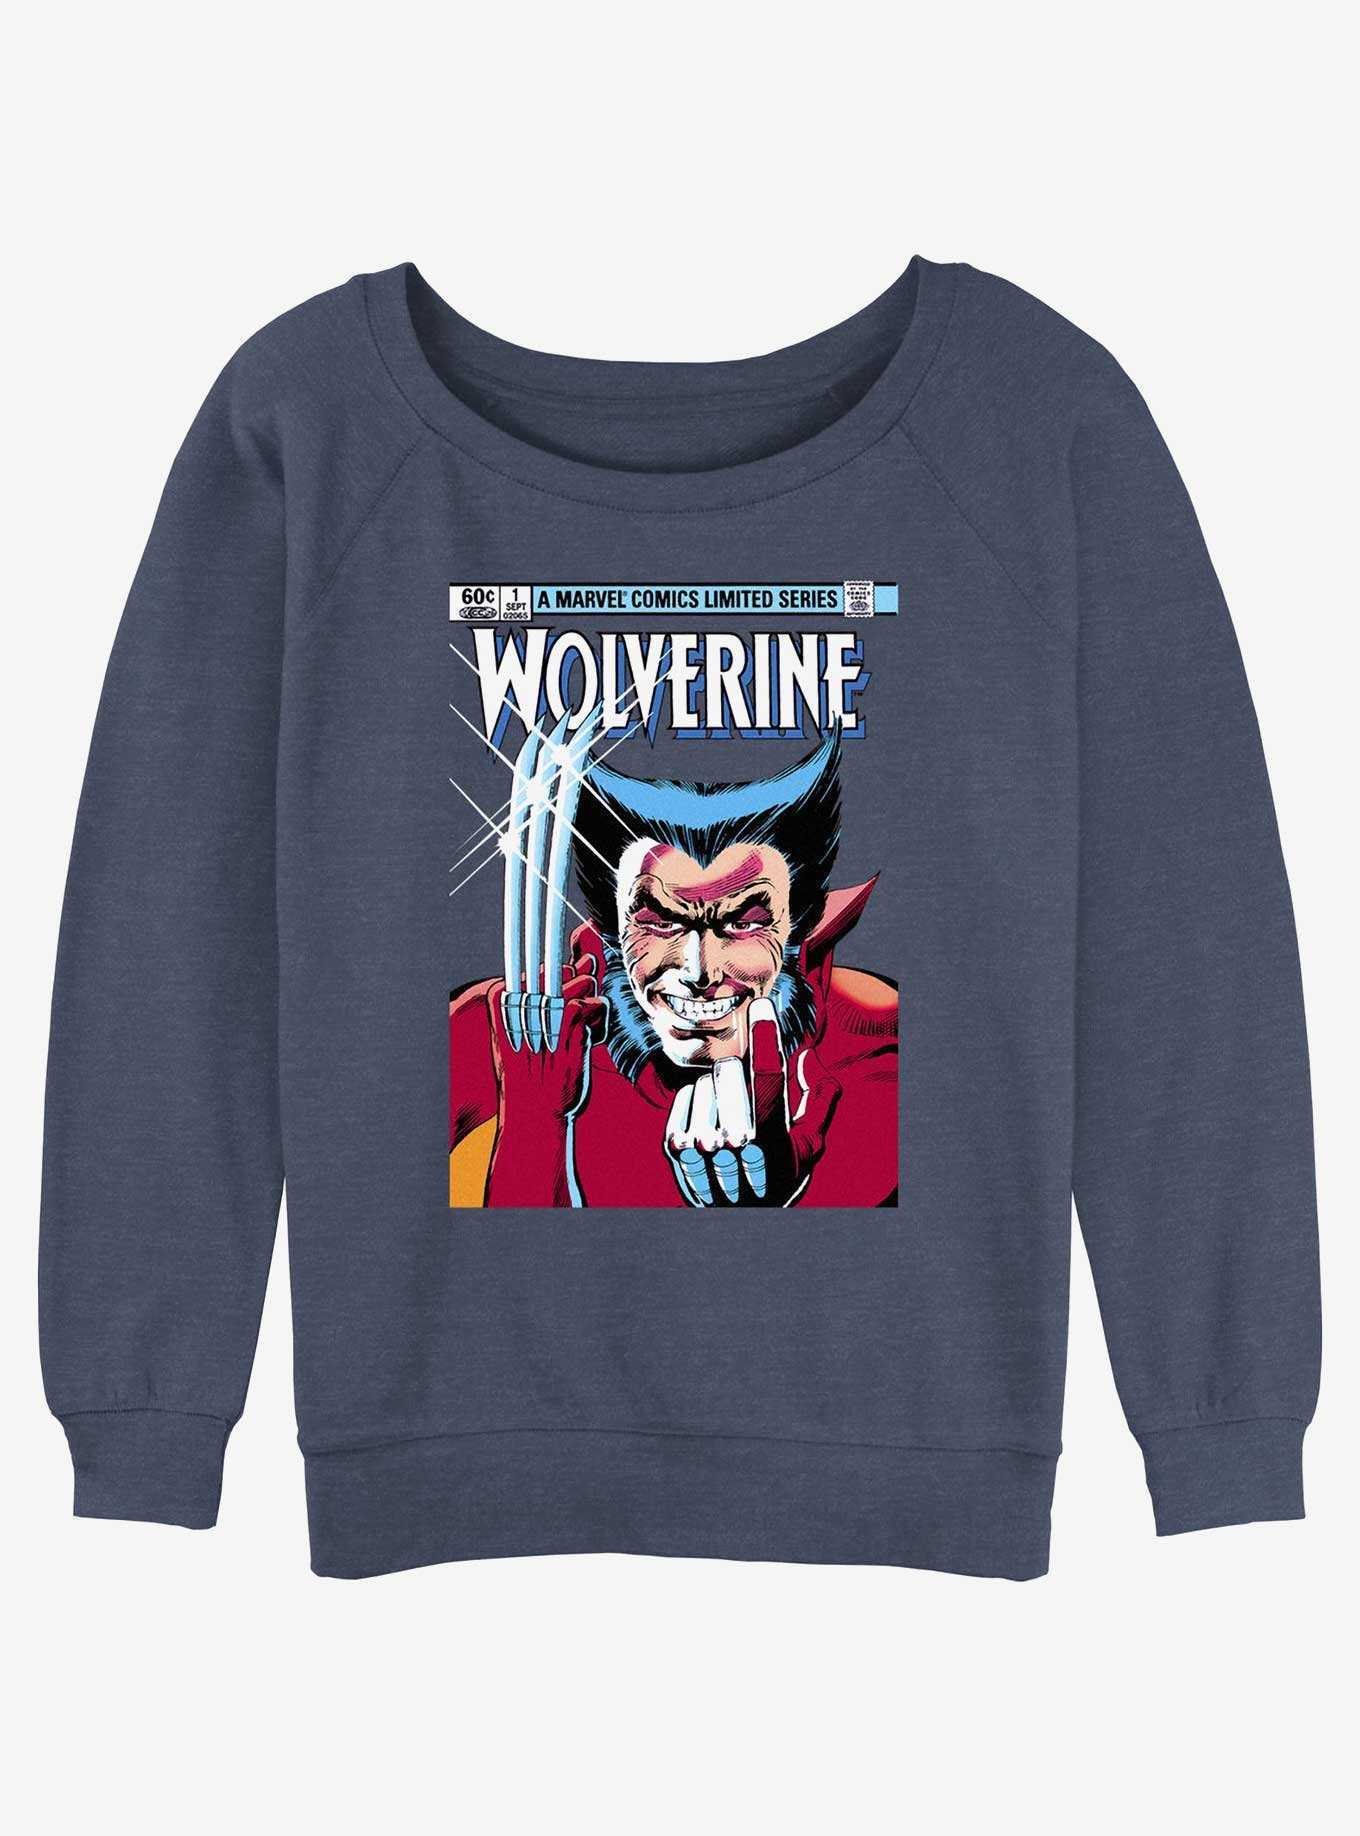 Wolverine 1st Issue Comic Cover Girls Slouchy Sweatshirt, , hi-res